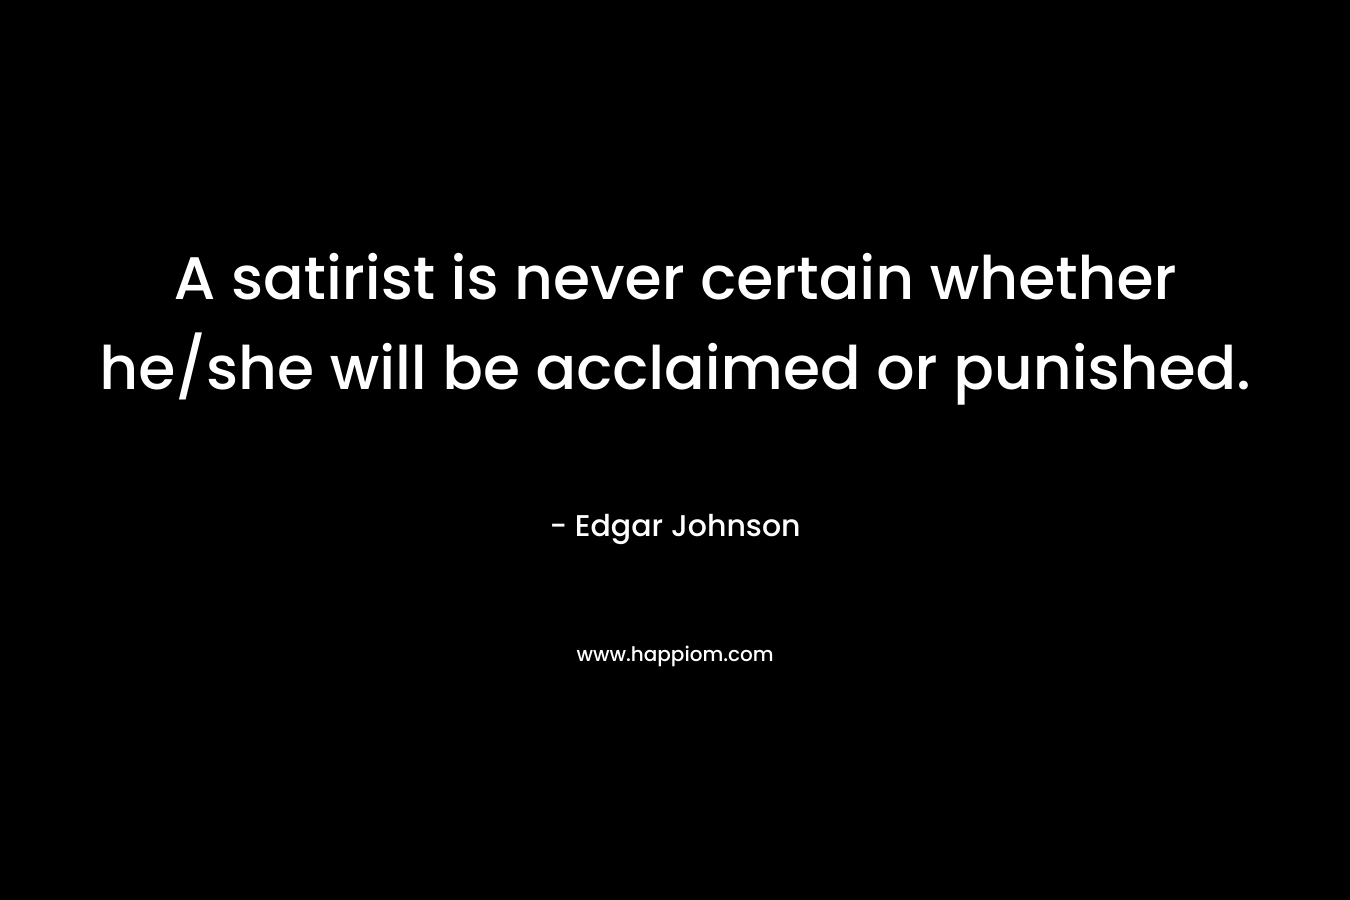 A satirist is never certain whether he/she will be acclaimed or punished. – Edgar Johnson